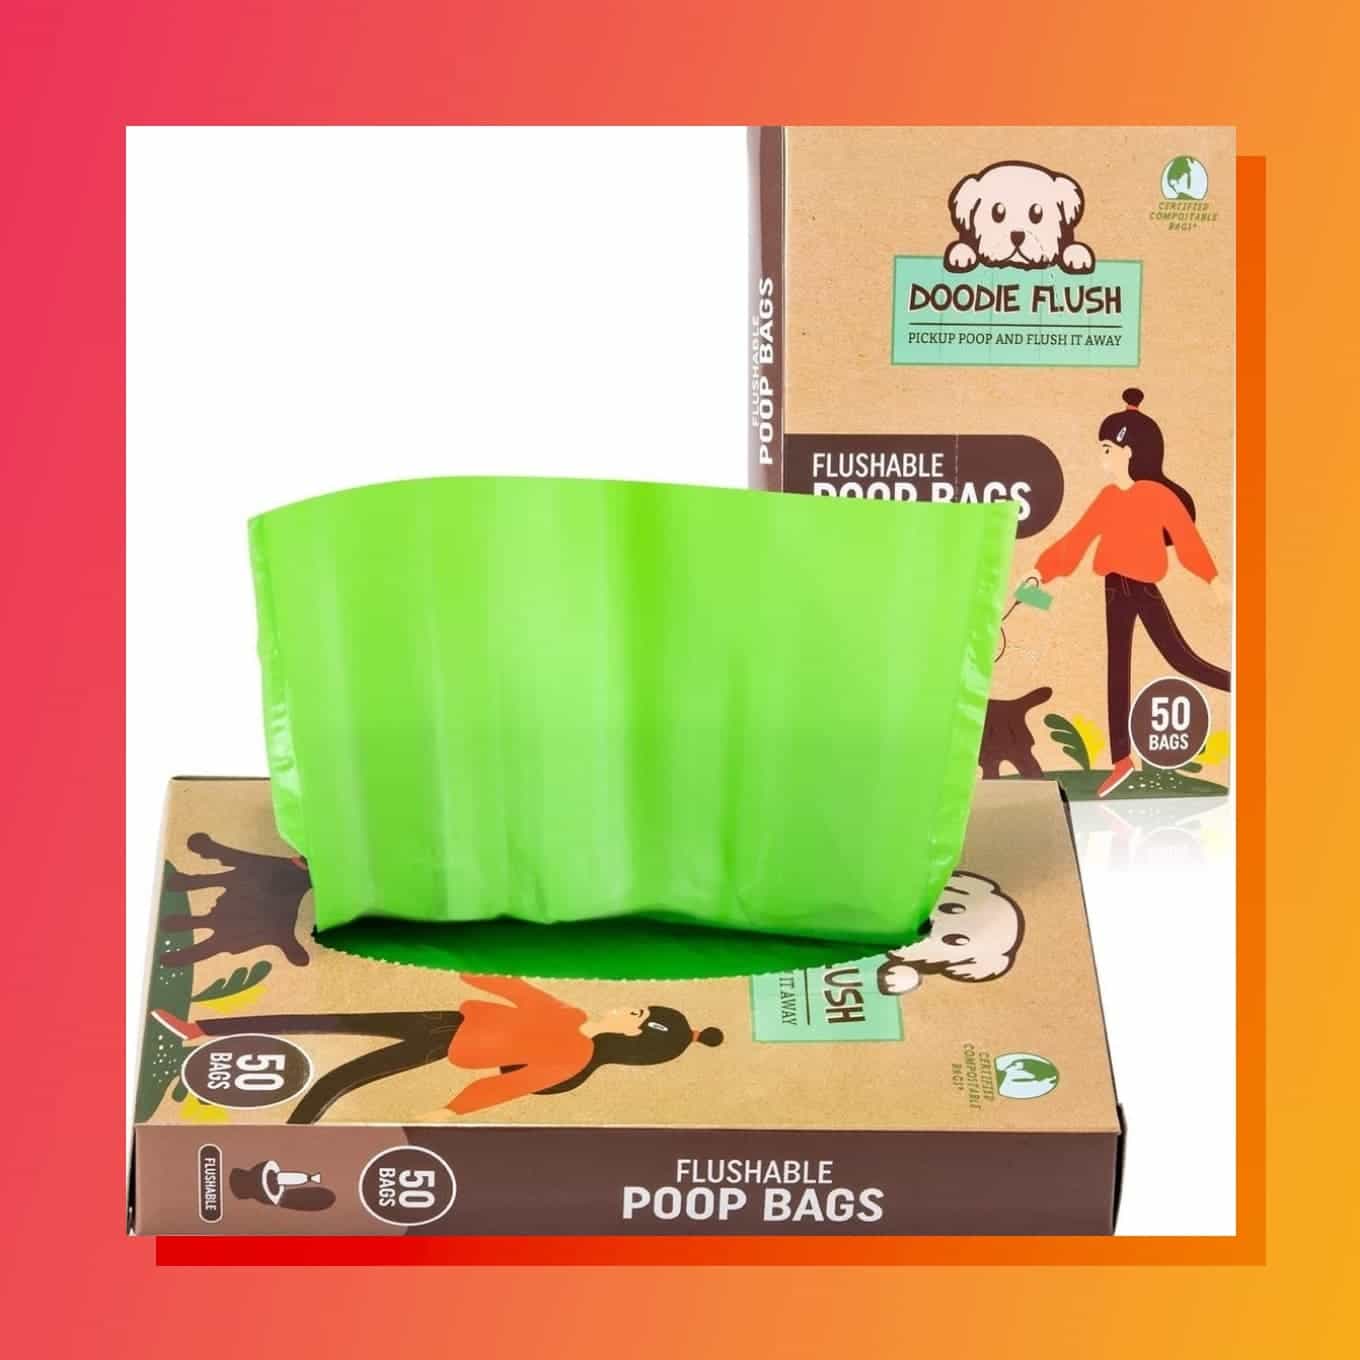 Box of Doodie Flush flushable dog poop bags